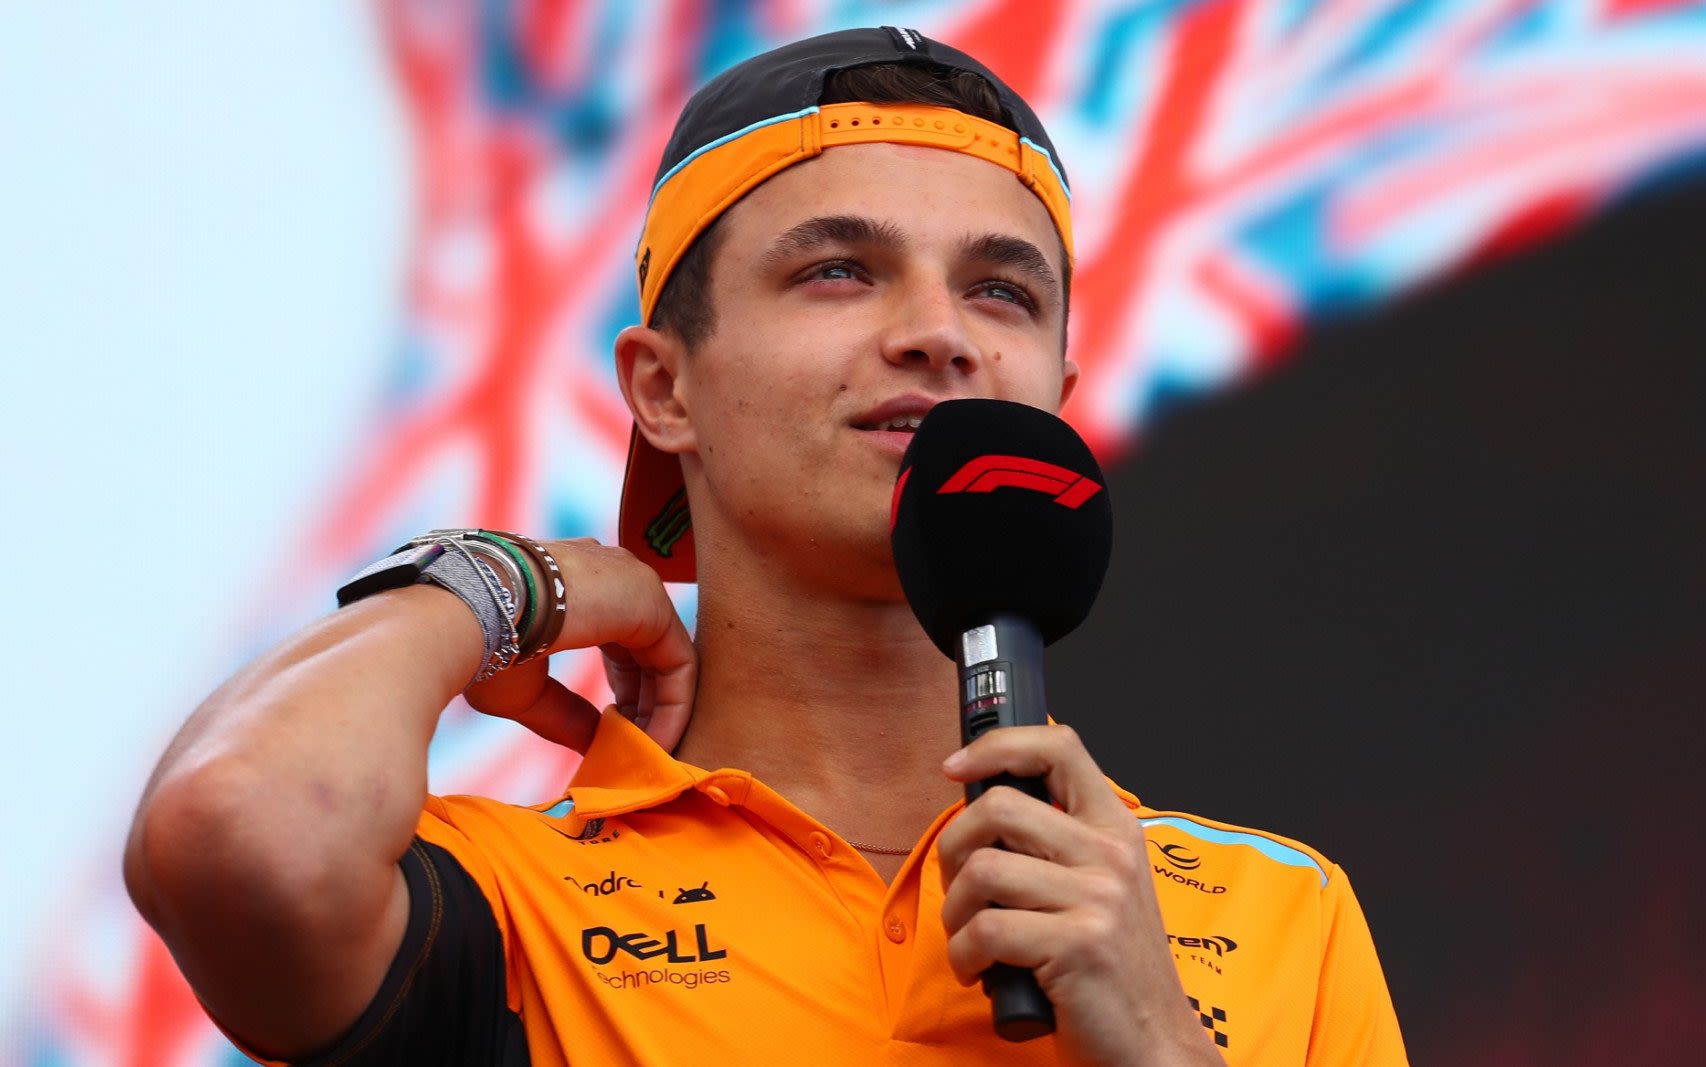 Lando Norris: I do not need to drive like an idiot to beat Max Verstappen